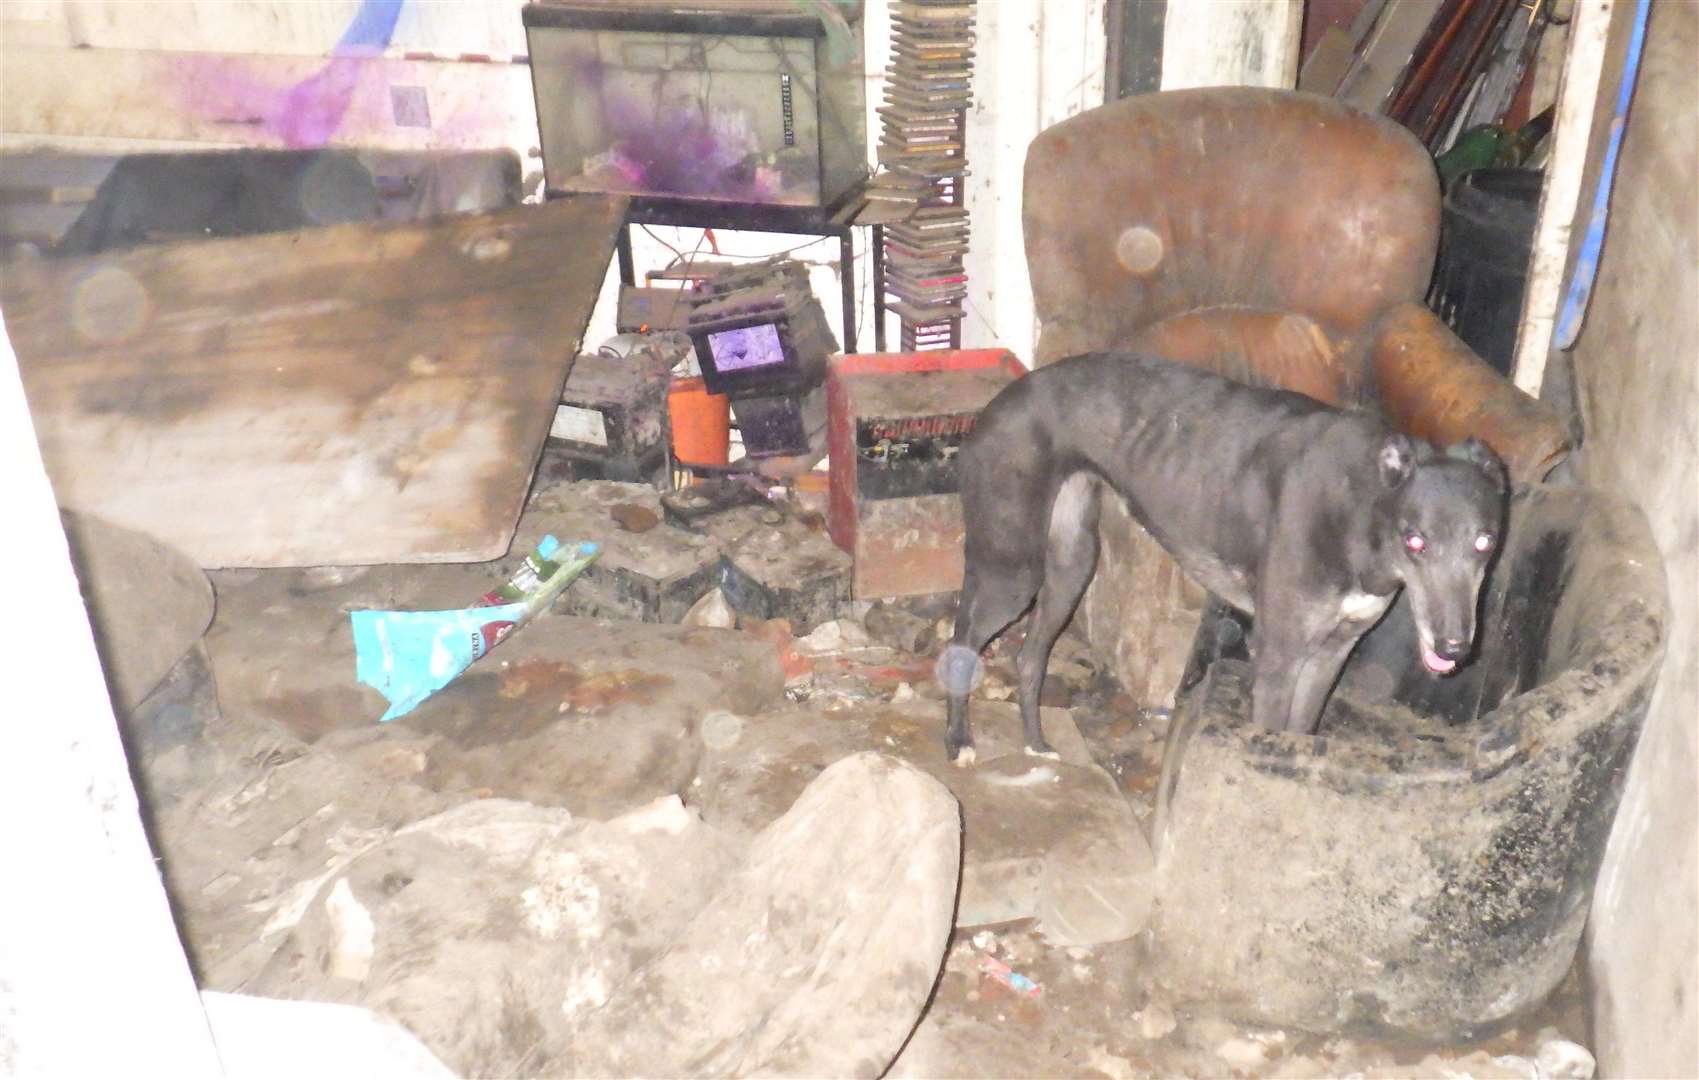 Photos taken by investigators of the conditions in which Langley Beck kept his animals